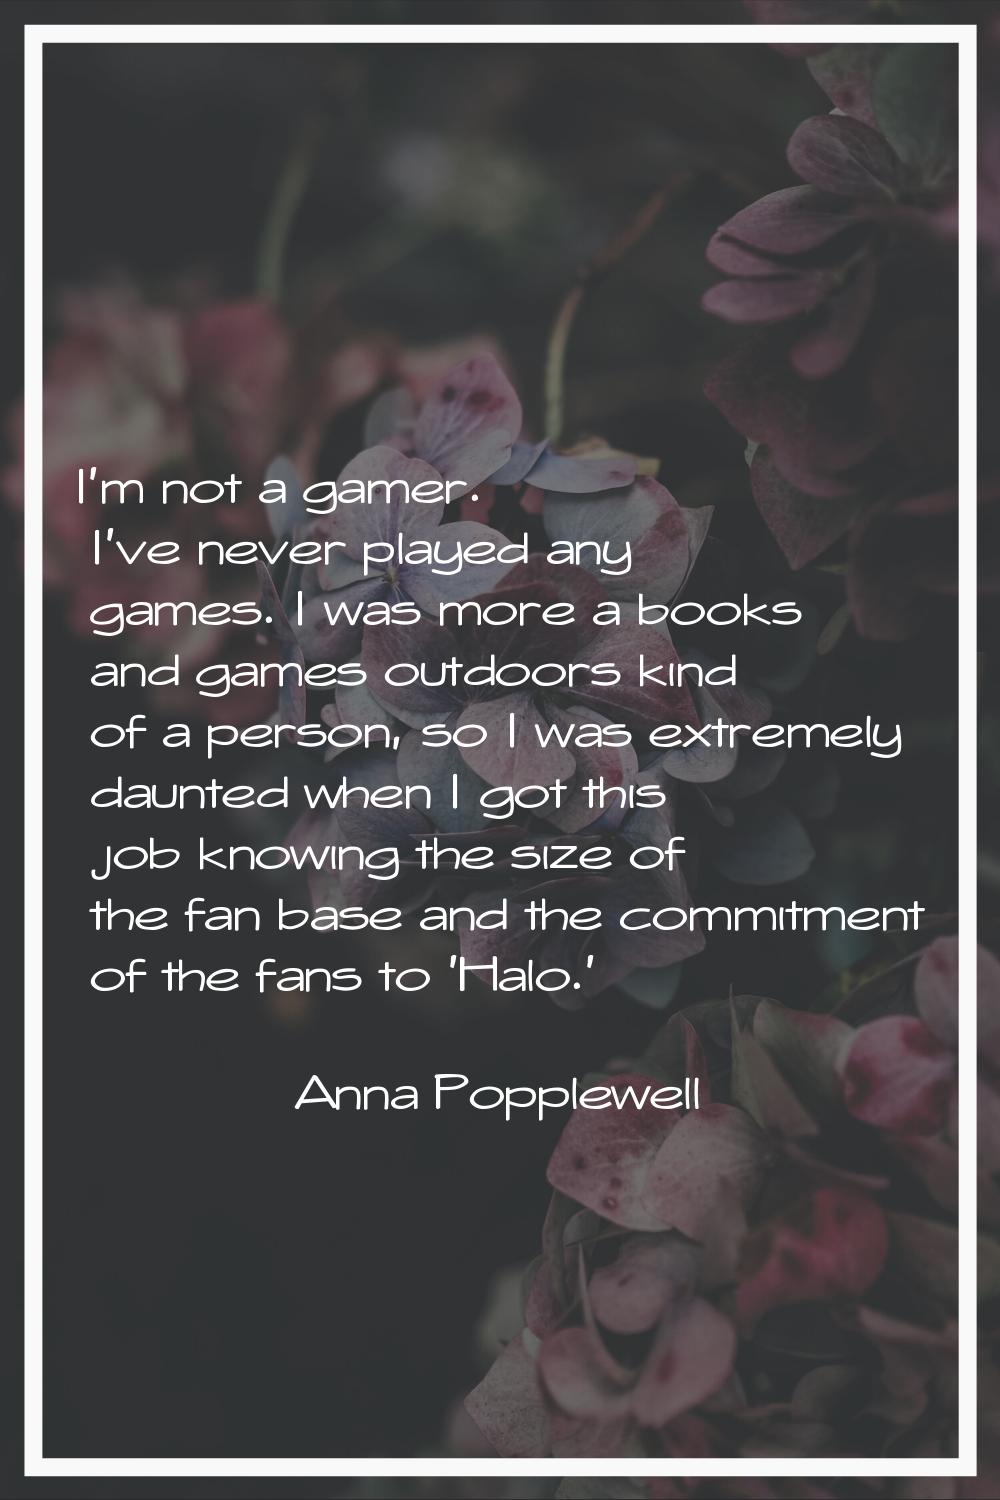 I'm not a gamer. I've never played any games. I was more a books and games outdoors kind of a perso